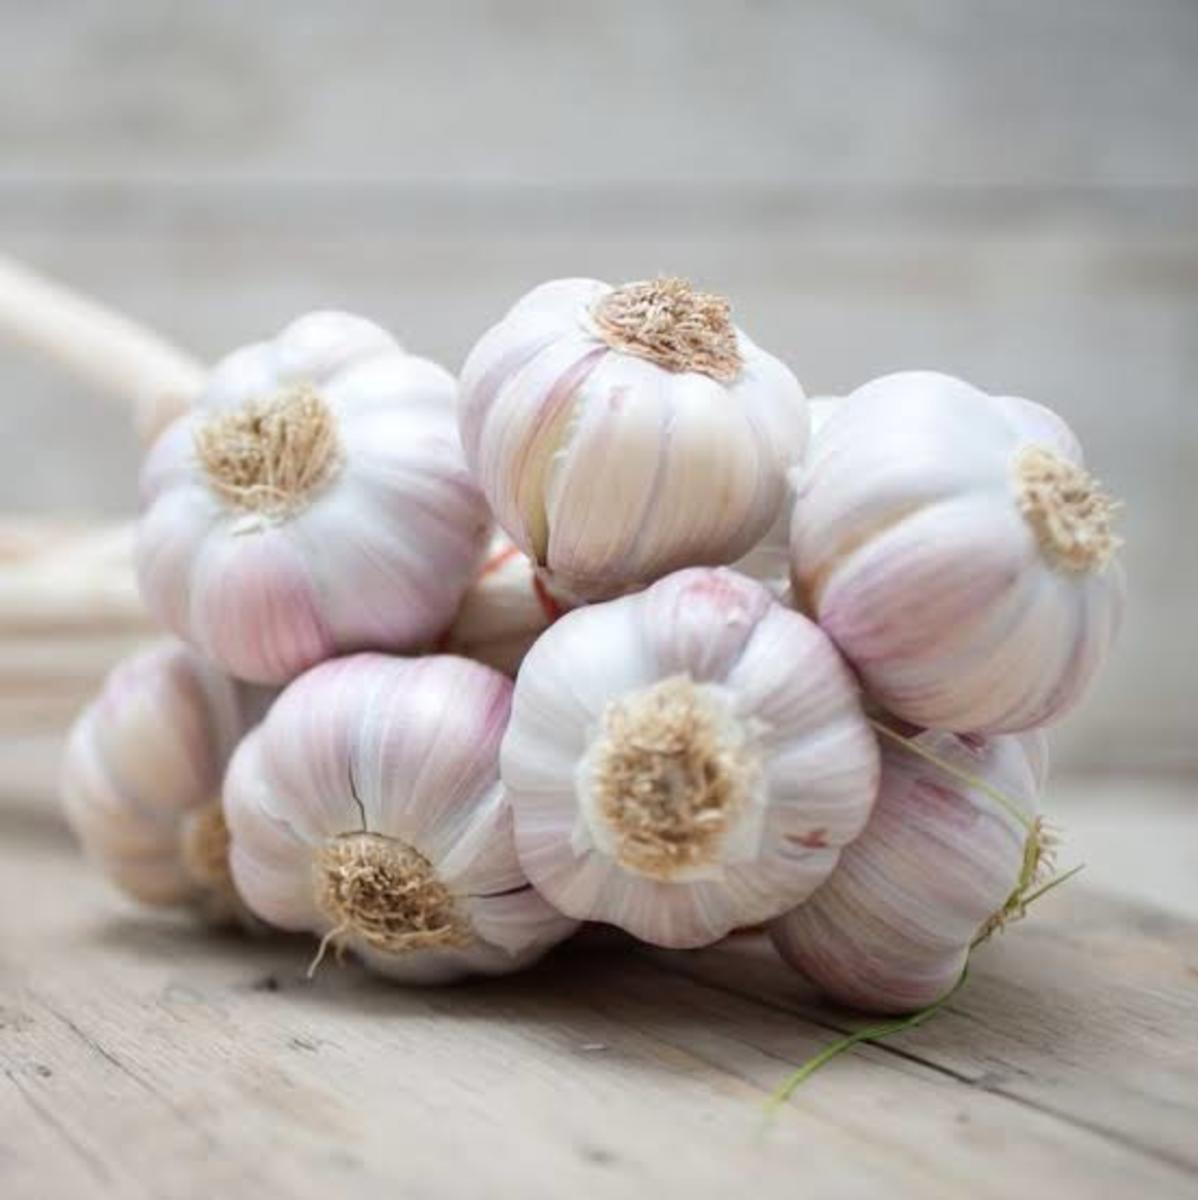 10-health-benefits-of-garlic-that-you-did-not-know